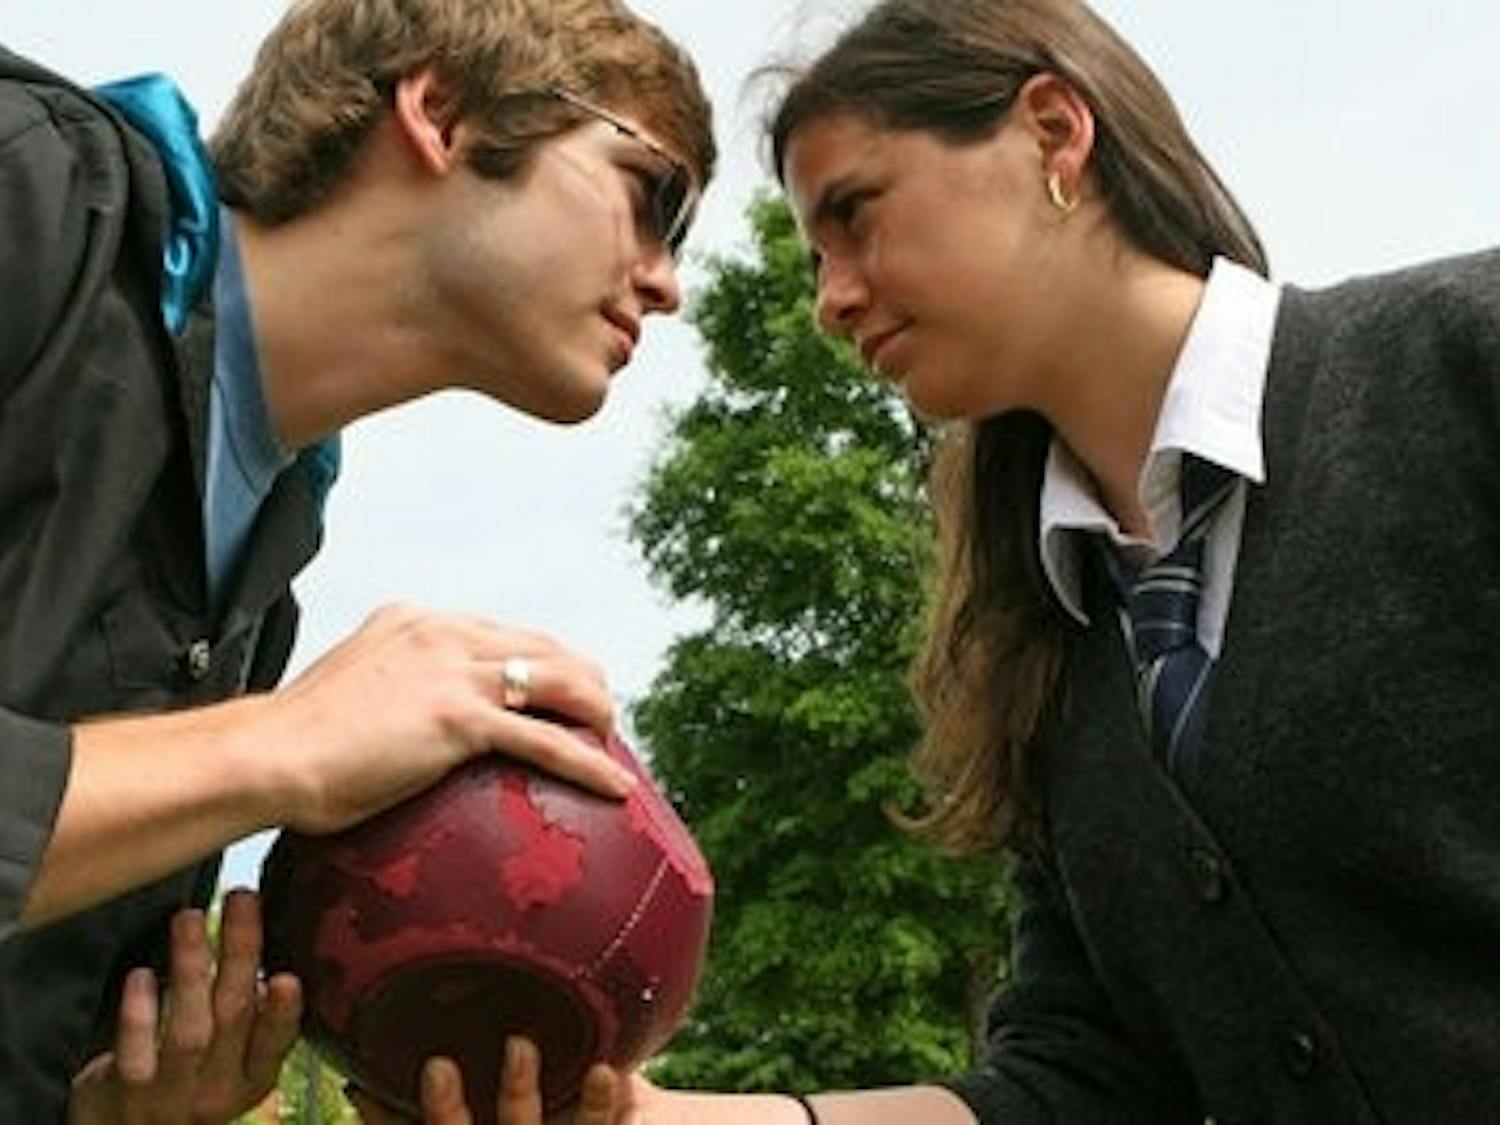 Katie Guthier, right, sophomore in industrial engineering and Spanish, and Michael Lambert, junior in wildlife ecology and management, face off for the quaffle, a ball in play in the mythical sport of quidditch from the Harry Potter series. In the last decade, qudditch has been adapted and played at colleges across the U.S. Engineers Without Borders will be hosting a quidditch tournament April 21 to raise funds for the "Bolivia Project." (Rebecca Croomes / PHOTO EDITOR)